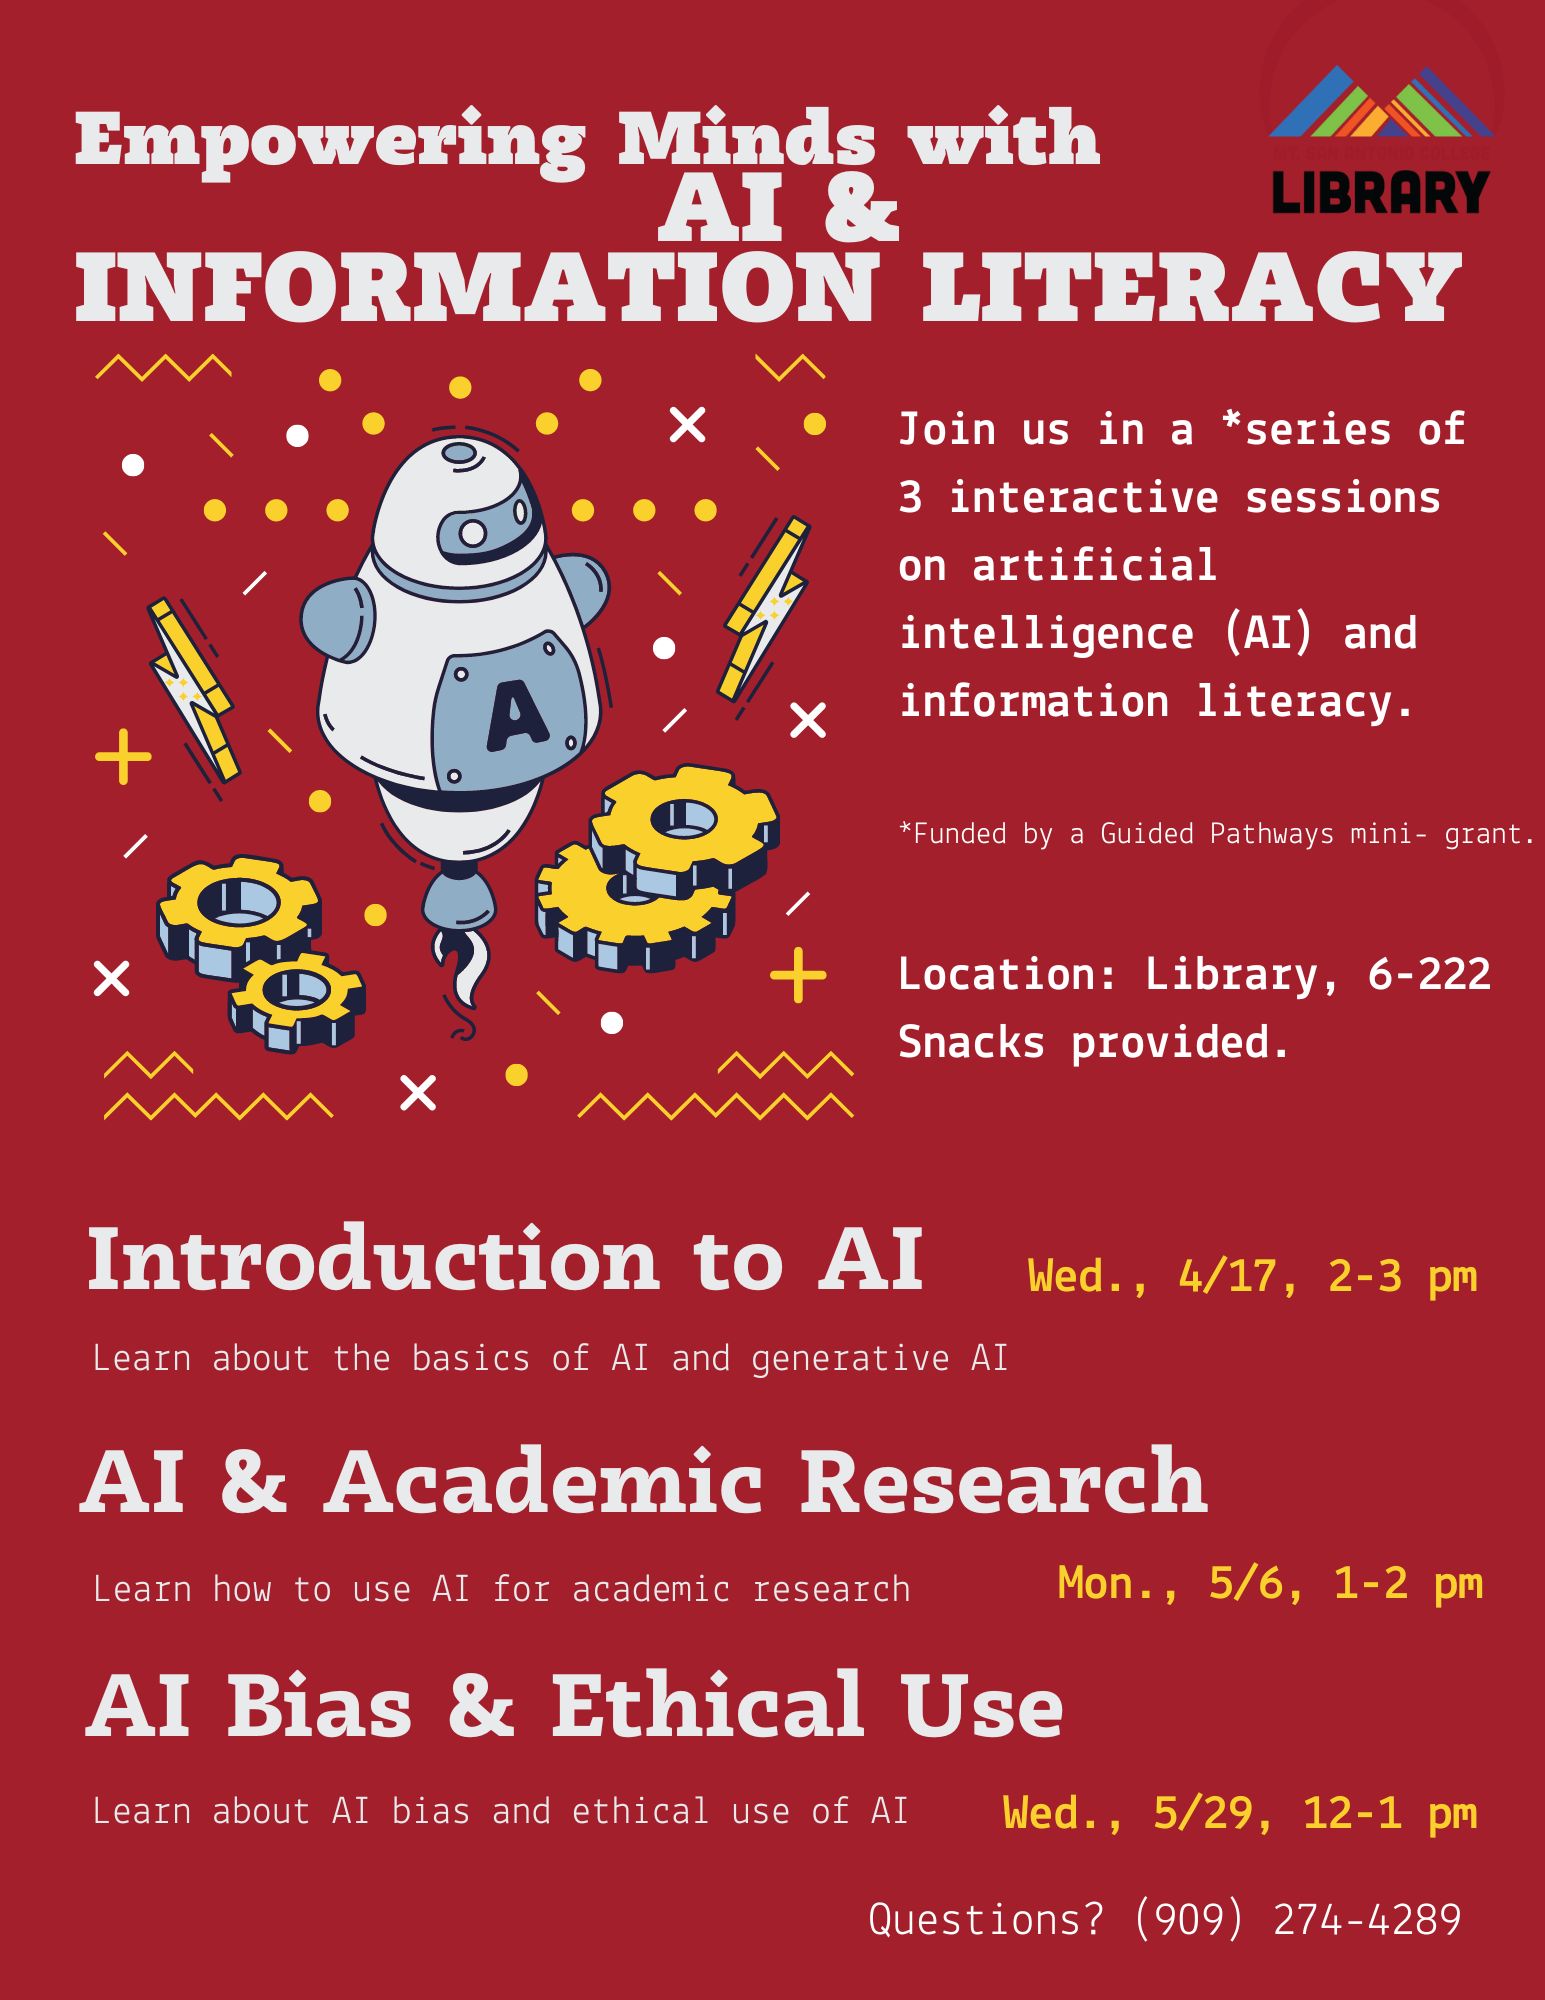 AI and Information Literacy 3-session Series